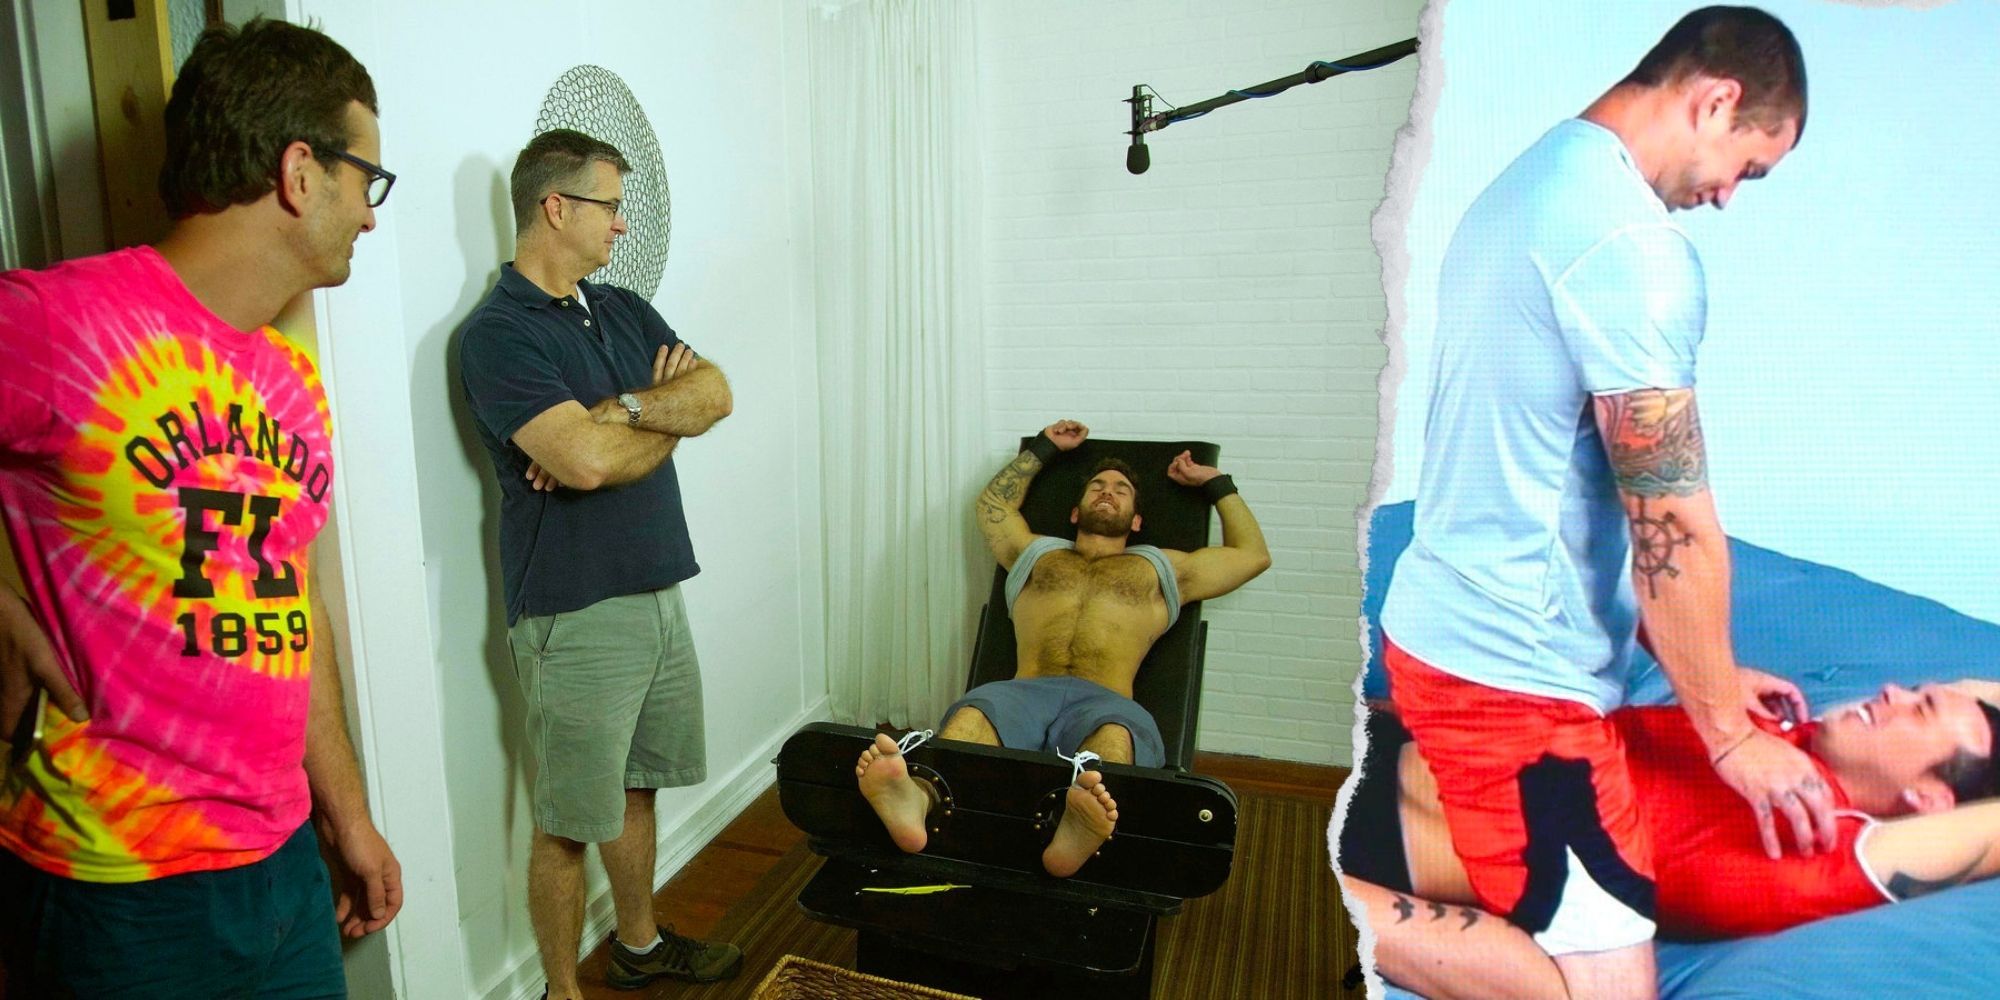 Tickled documentary creator David Farrier and an interviewee tied down, men having a tickle fight